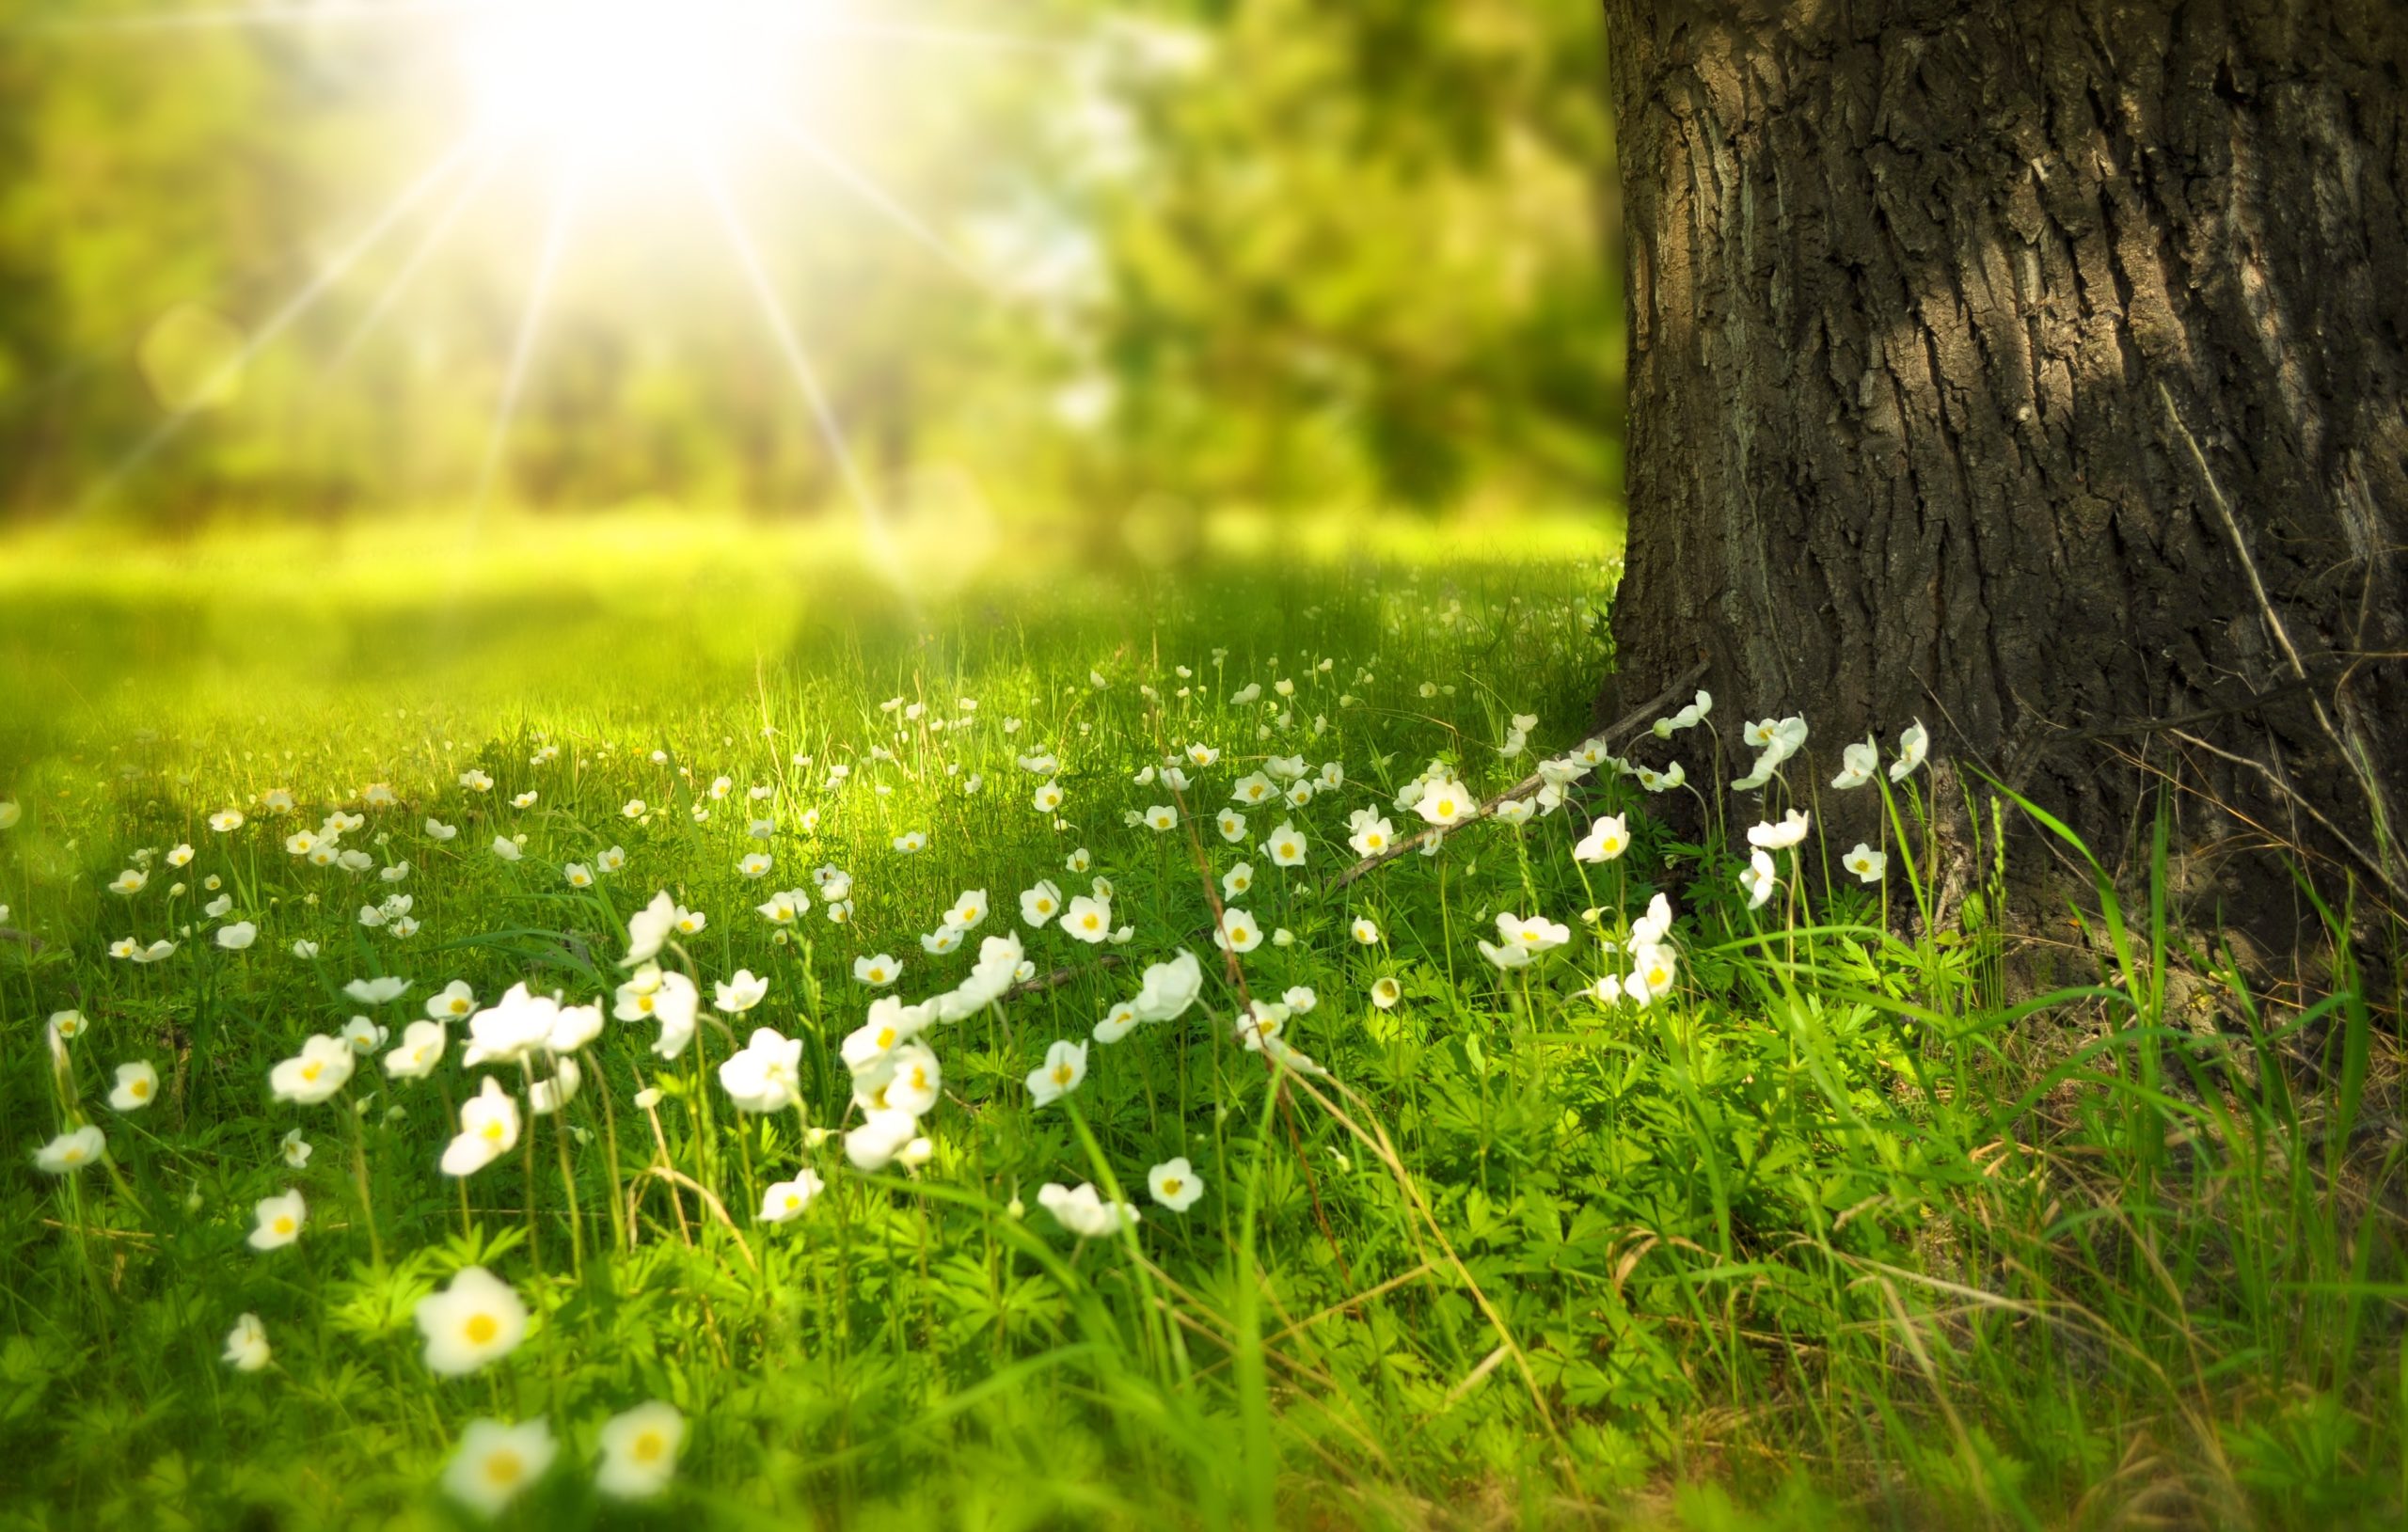 You are currently viewing 7 Reasons Spring Can Boost Your Mood AND Your Clutter Clearing Efforts